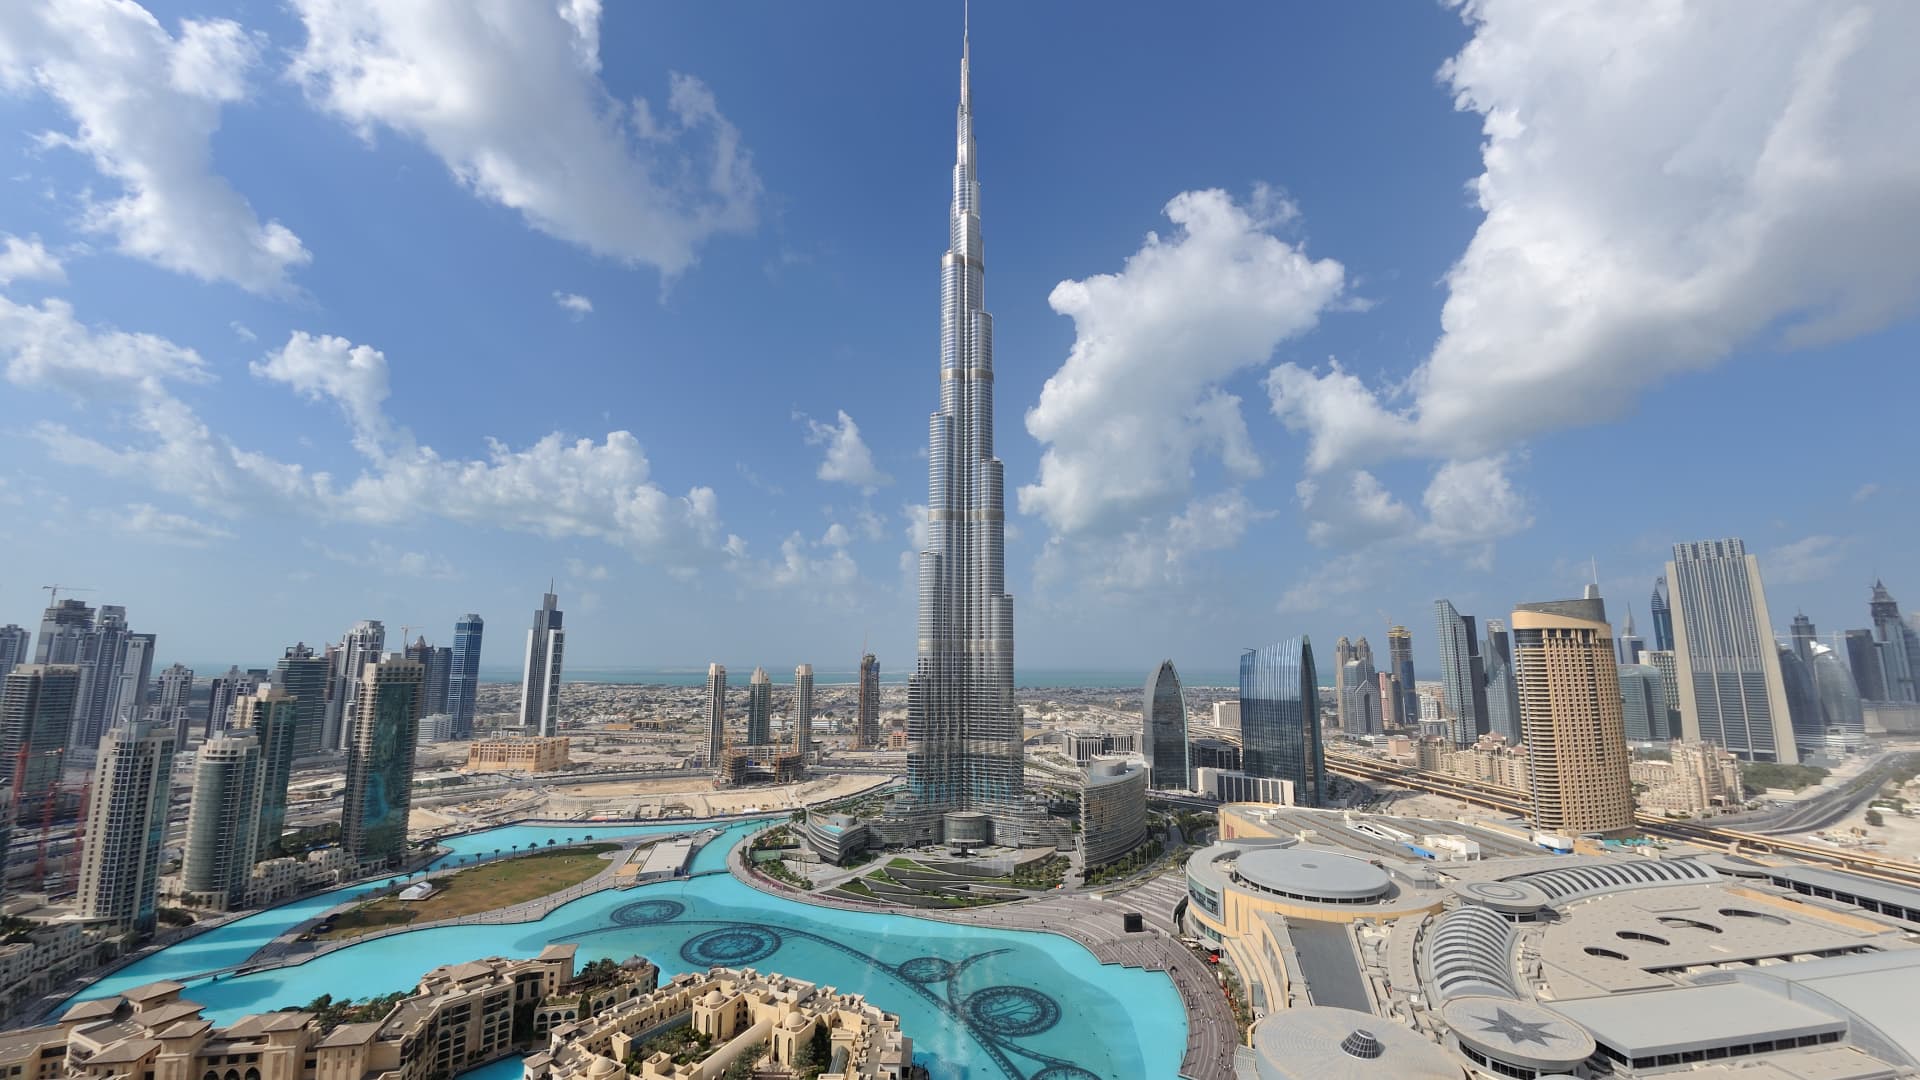 Dubai is home to the world's tallest building, the 2,716-foot Burj Khalifa, which opened in 2010.